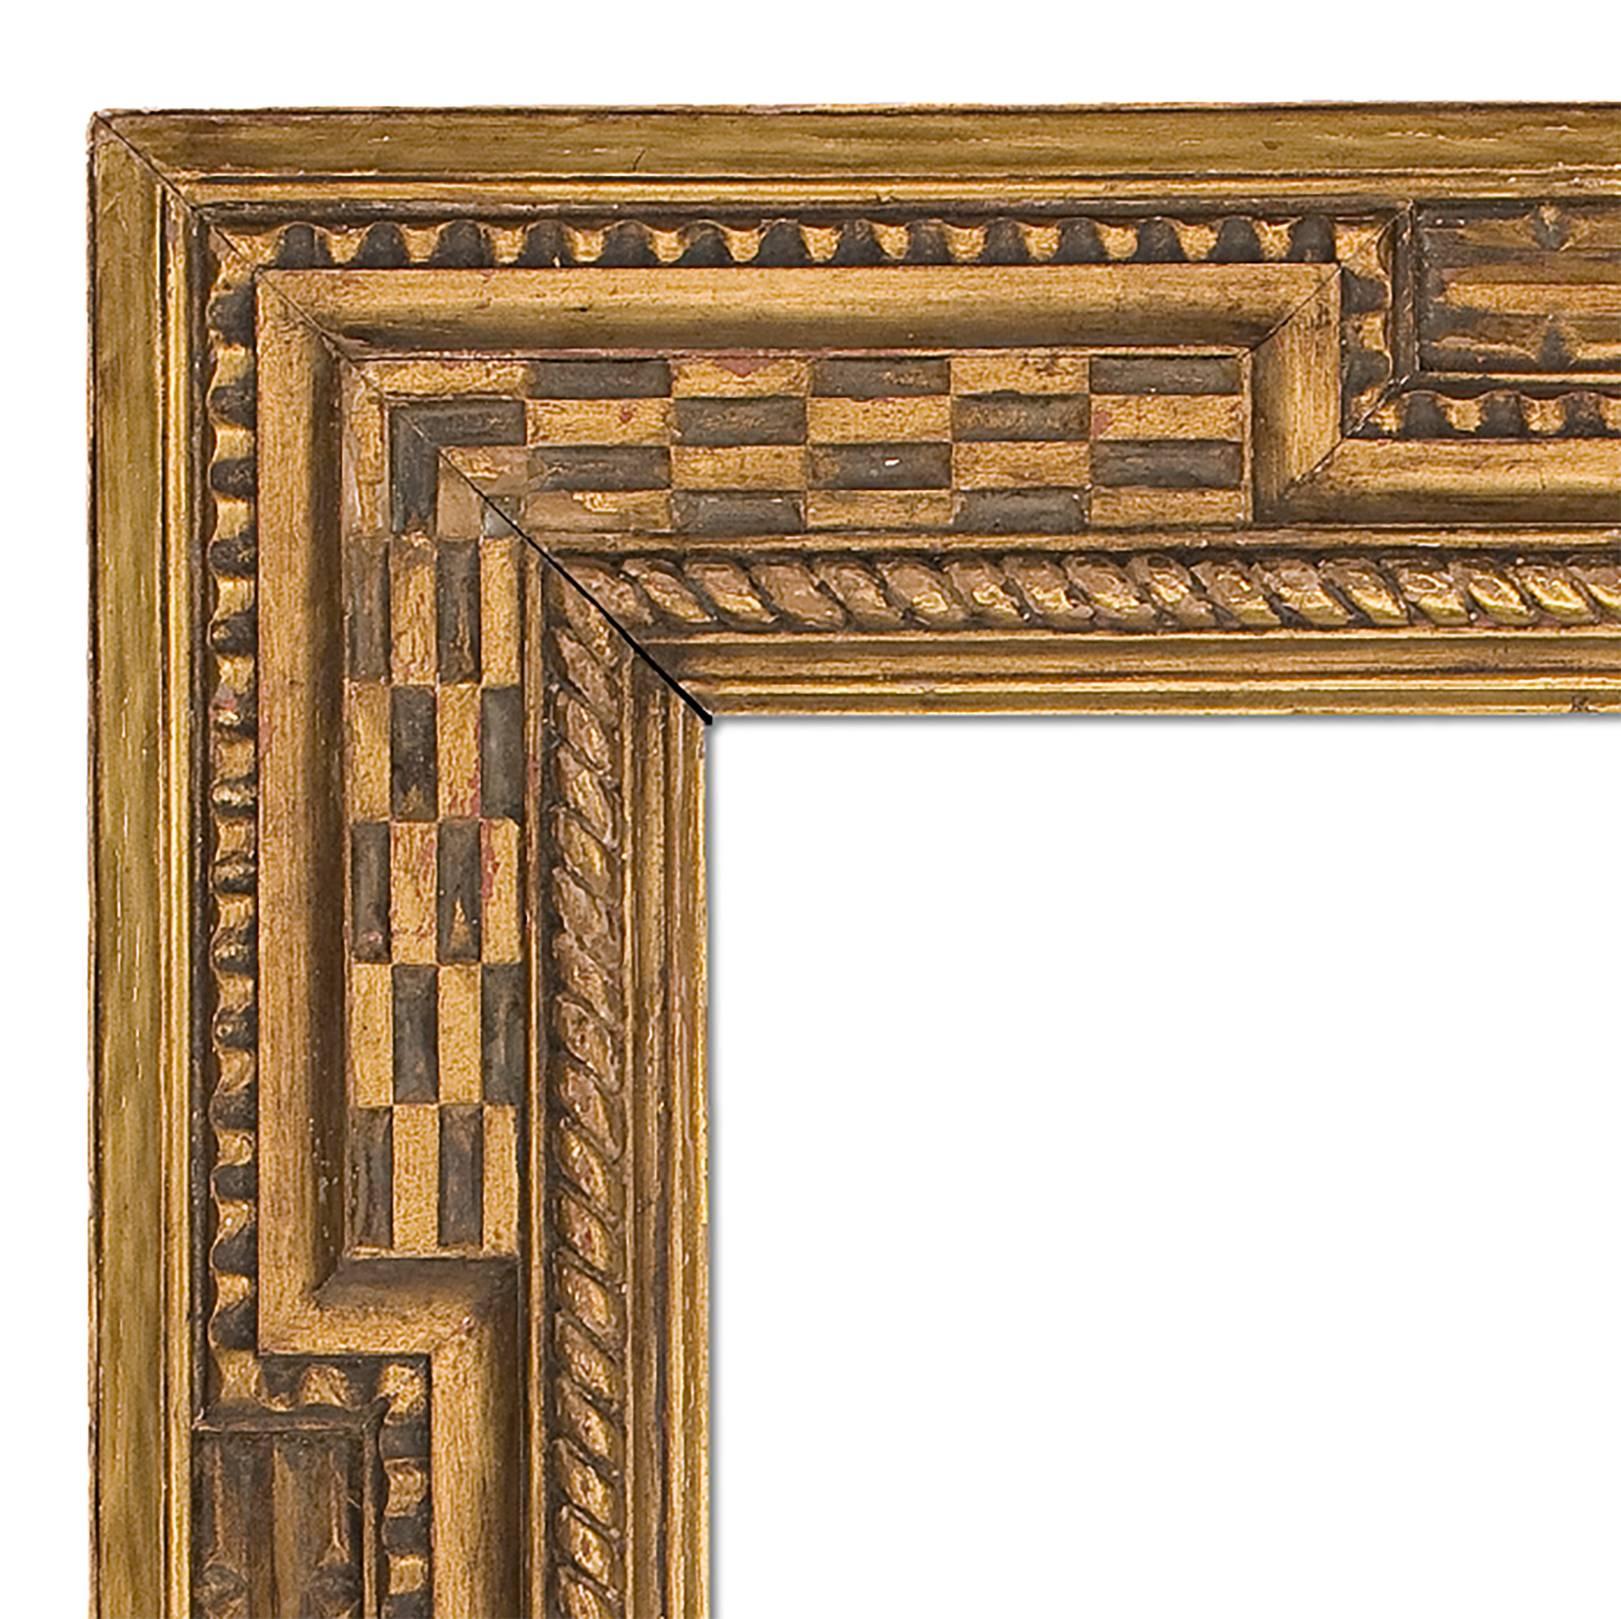 Early 20th century style Arts & Crafts carved and gilt mirror with Dutch extended corner design. Measures : 30